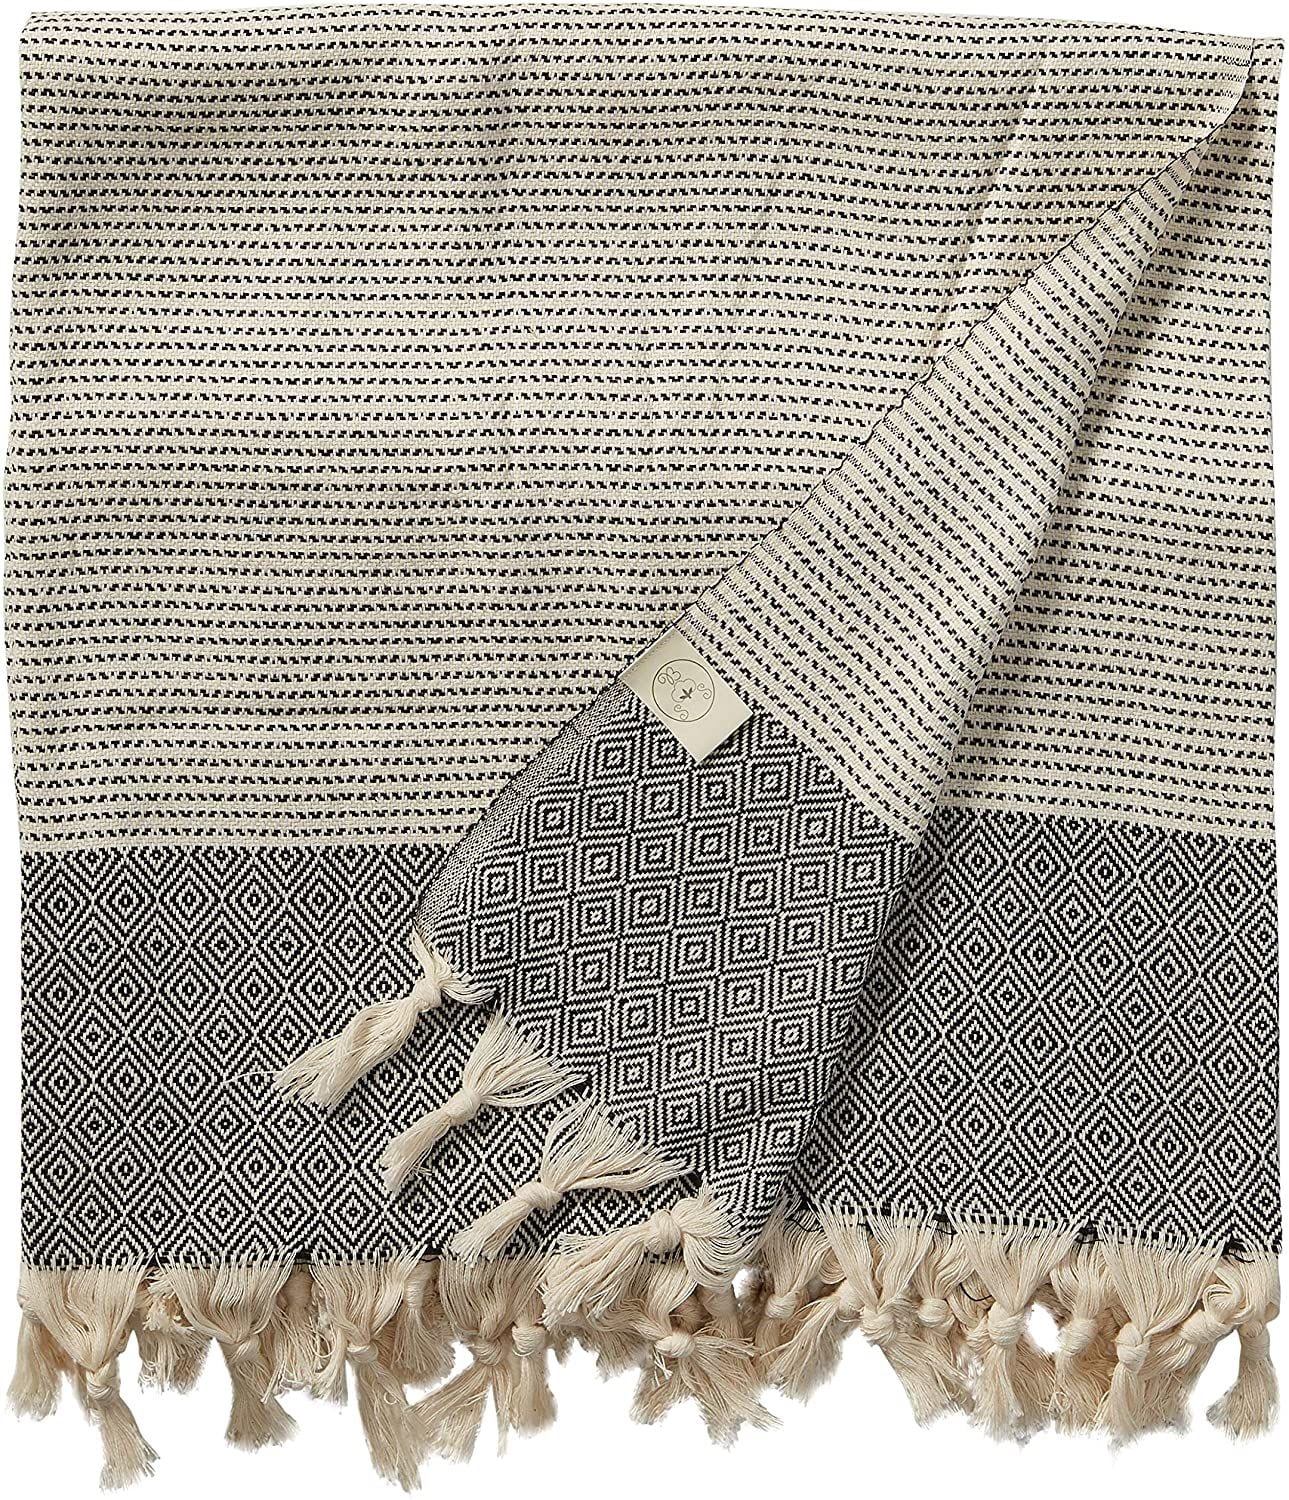 100% Cotton Hierapolis XL Turkish Towel, as featured in Amazon's 2021 Big Winter Sale.